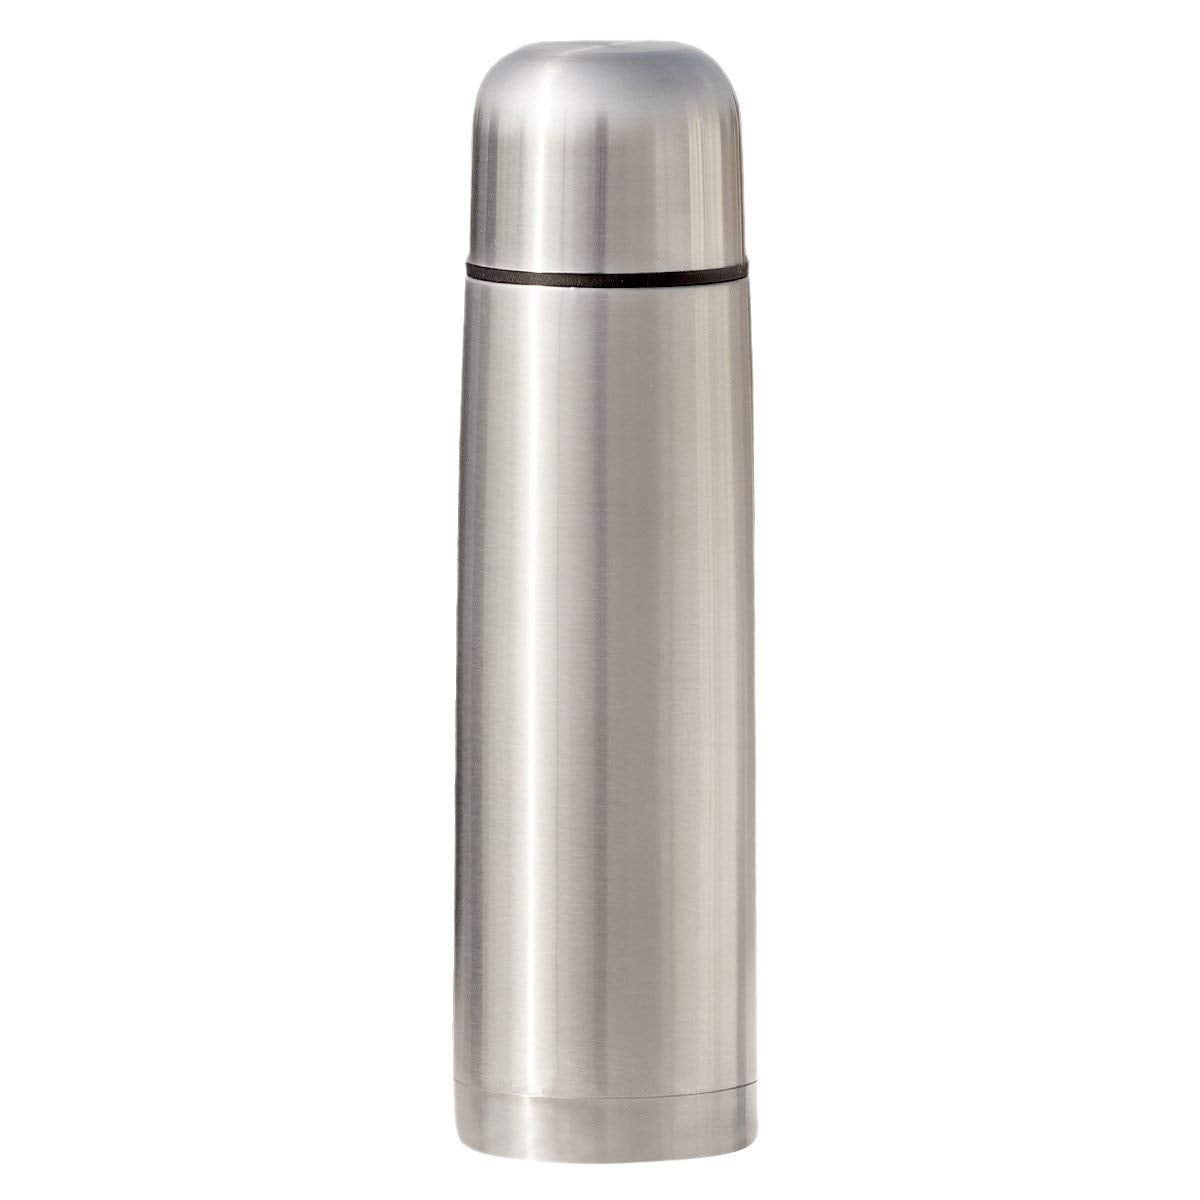 Vacuum Stainless Steel Hot Cold Coffee Tea Water Bottle Warm Thermos Flask Mug 